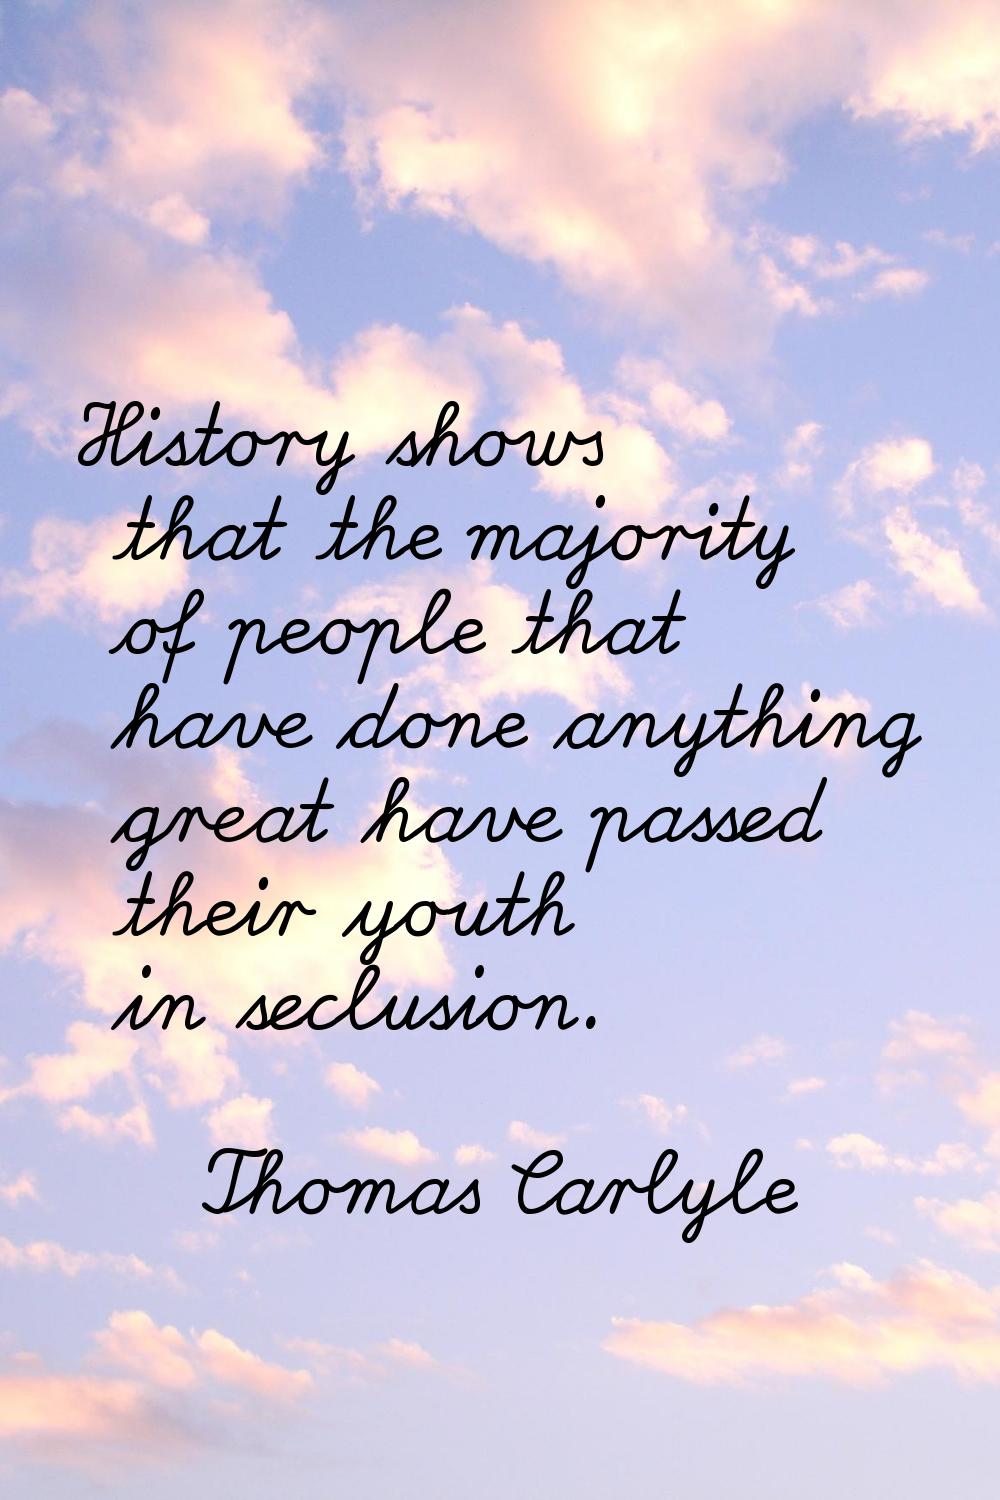 History shows that the majority of people that have done anything great have passed their youth in 